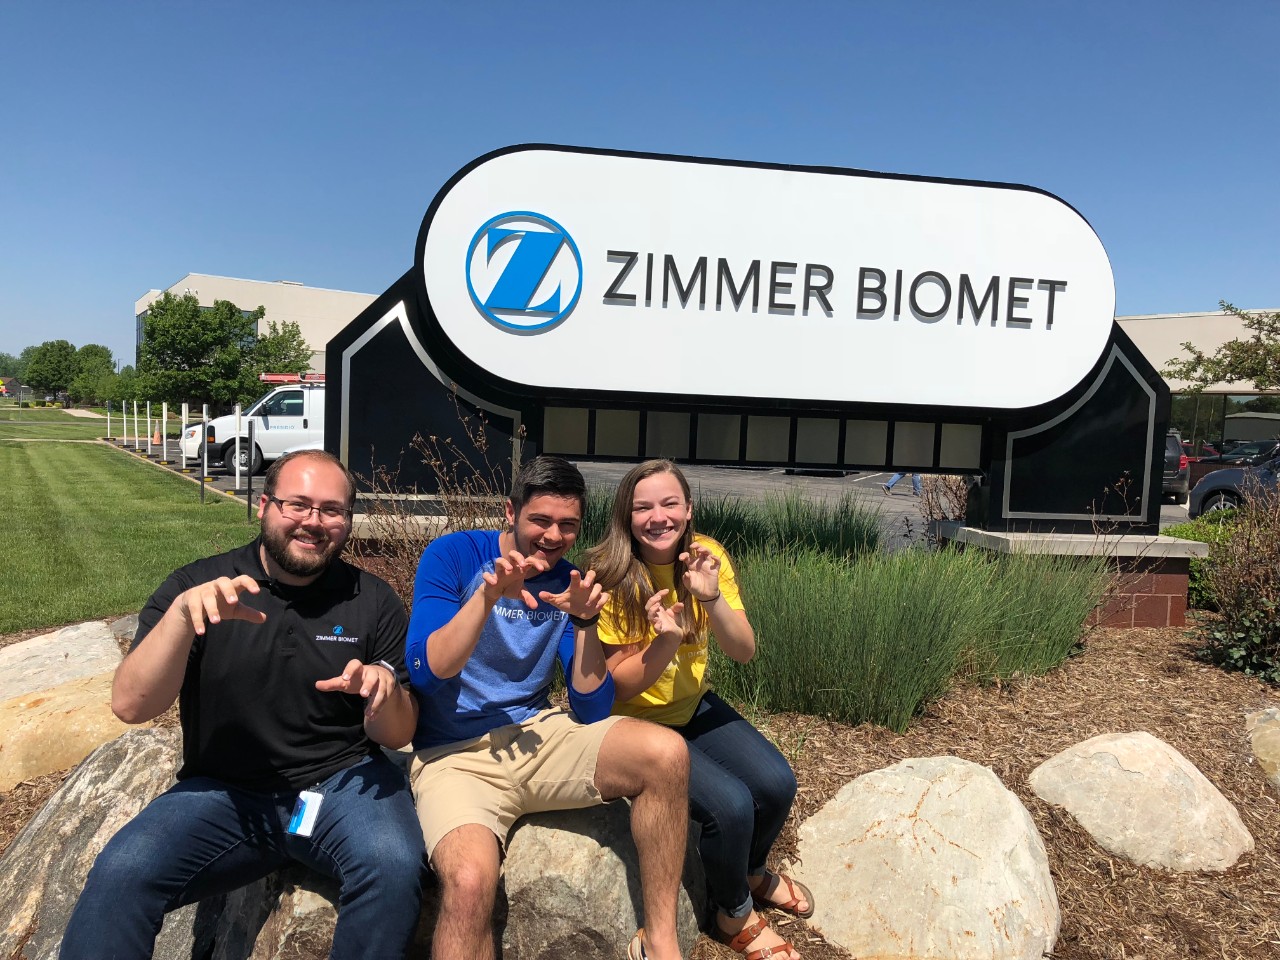 Goodwin and two friends in front of Zimmer Biomet sign outside.